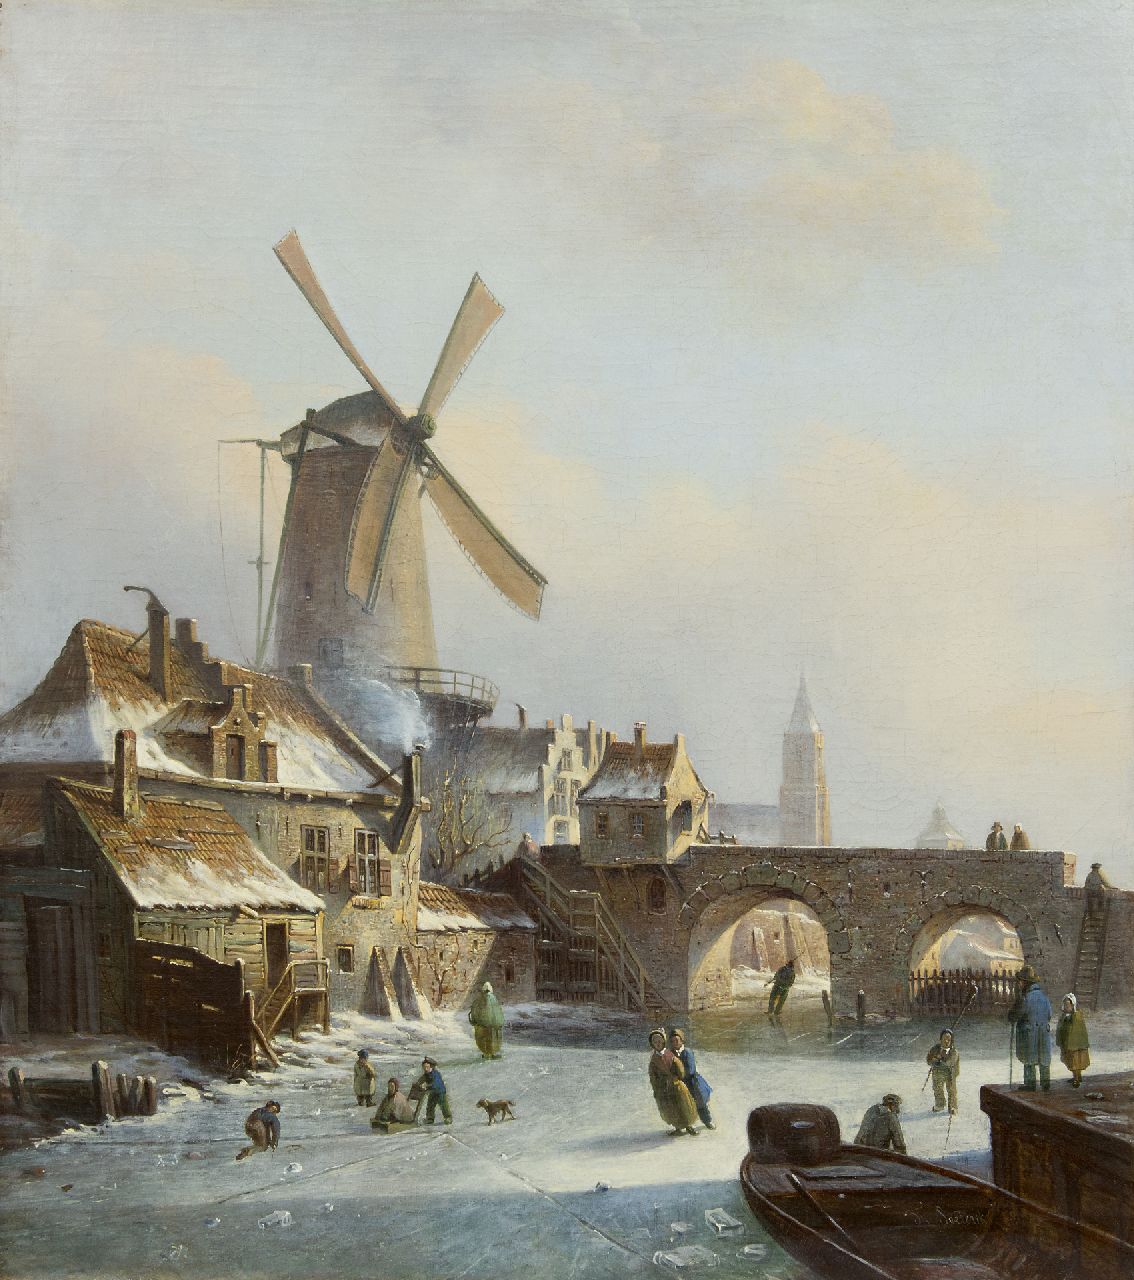 Soeterik T.  | Theodoor Soeterik, Skaters on a frozen outer canal near a mill, oil on canvas 67.0 x 59.7 cm, signed l.r.